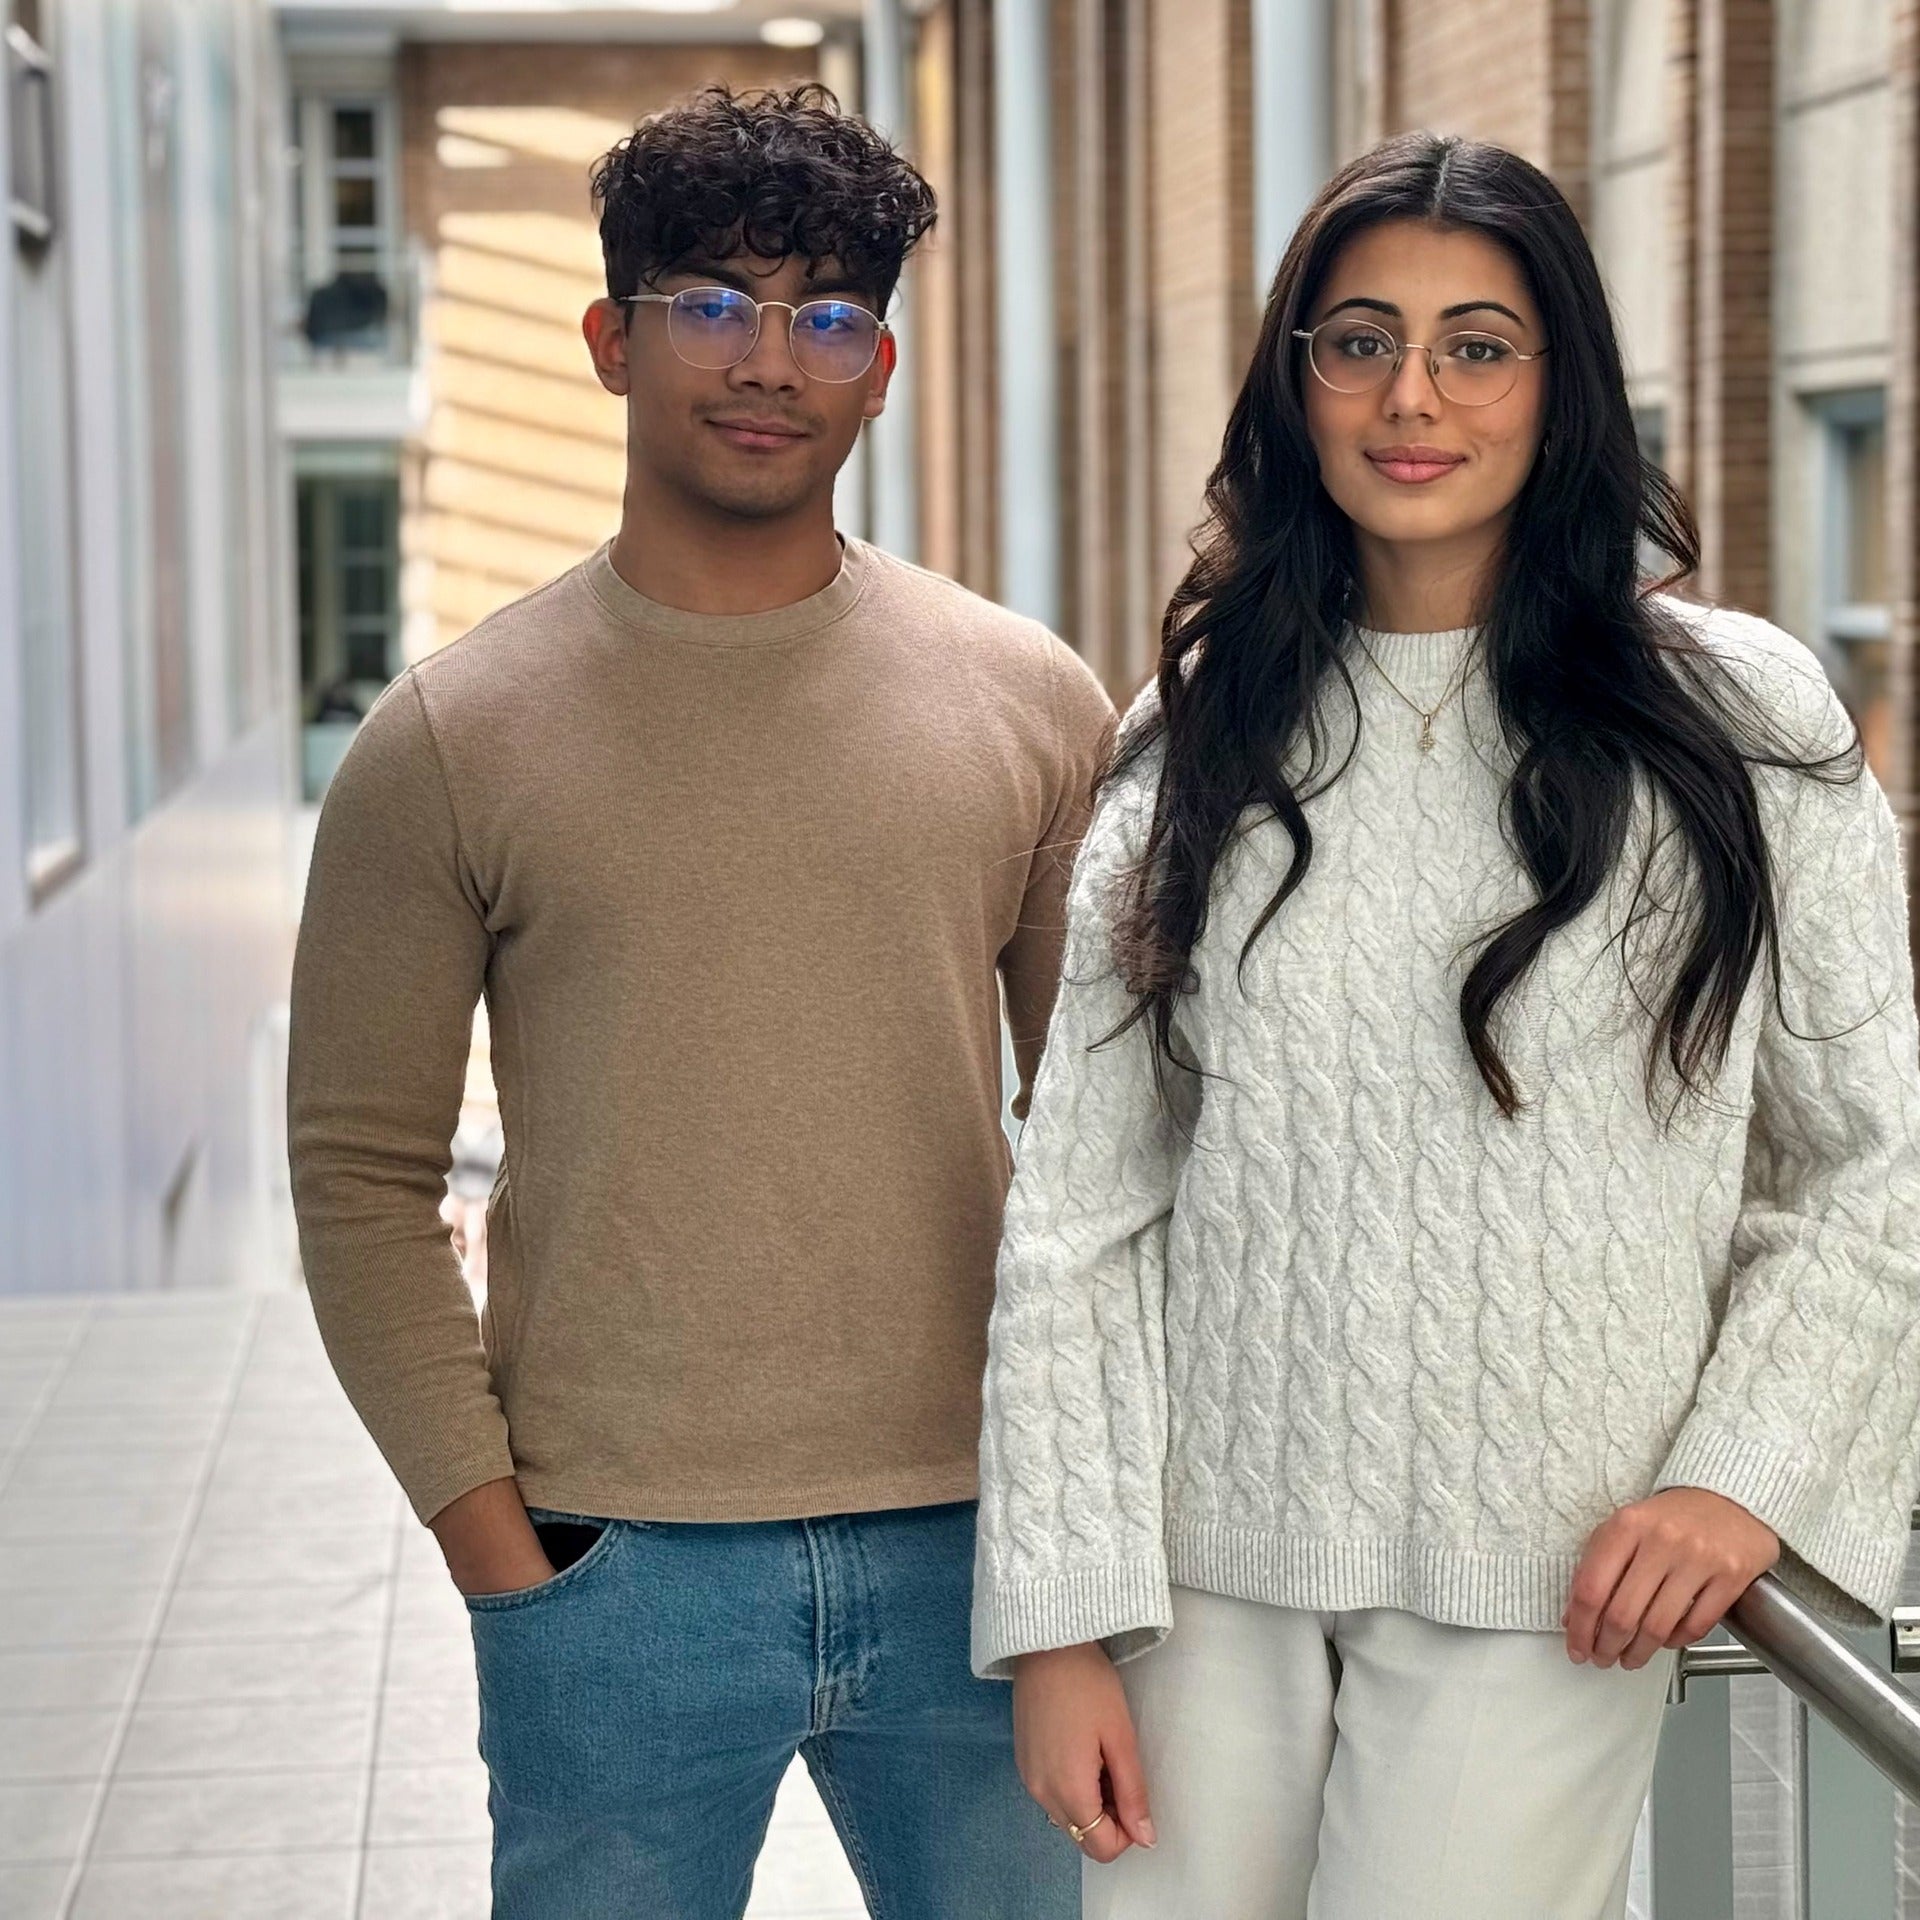 Kritika Grover and Murto Hilali standing together on the second floor of the Science Teaching Complex building